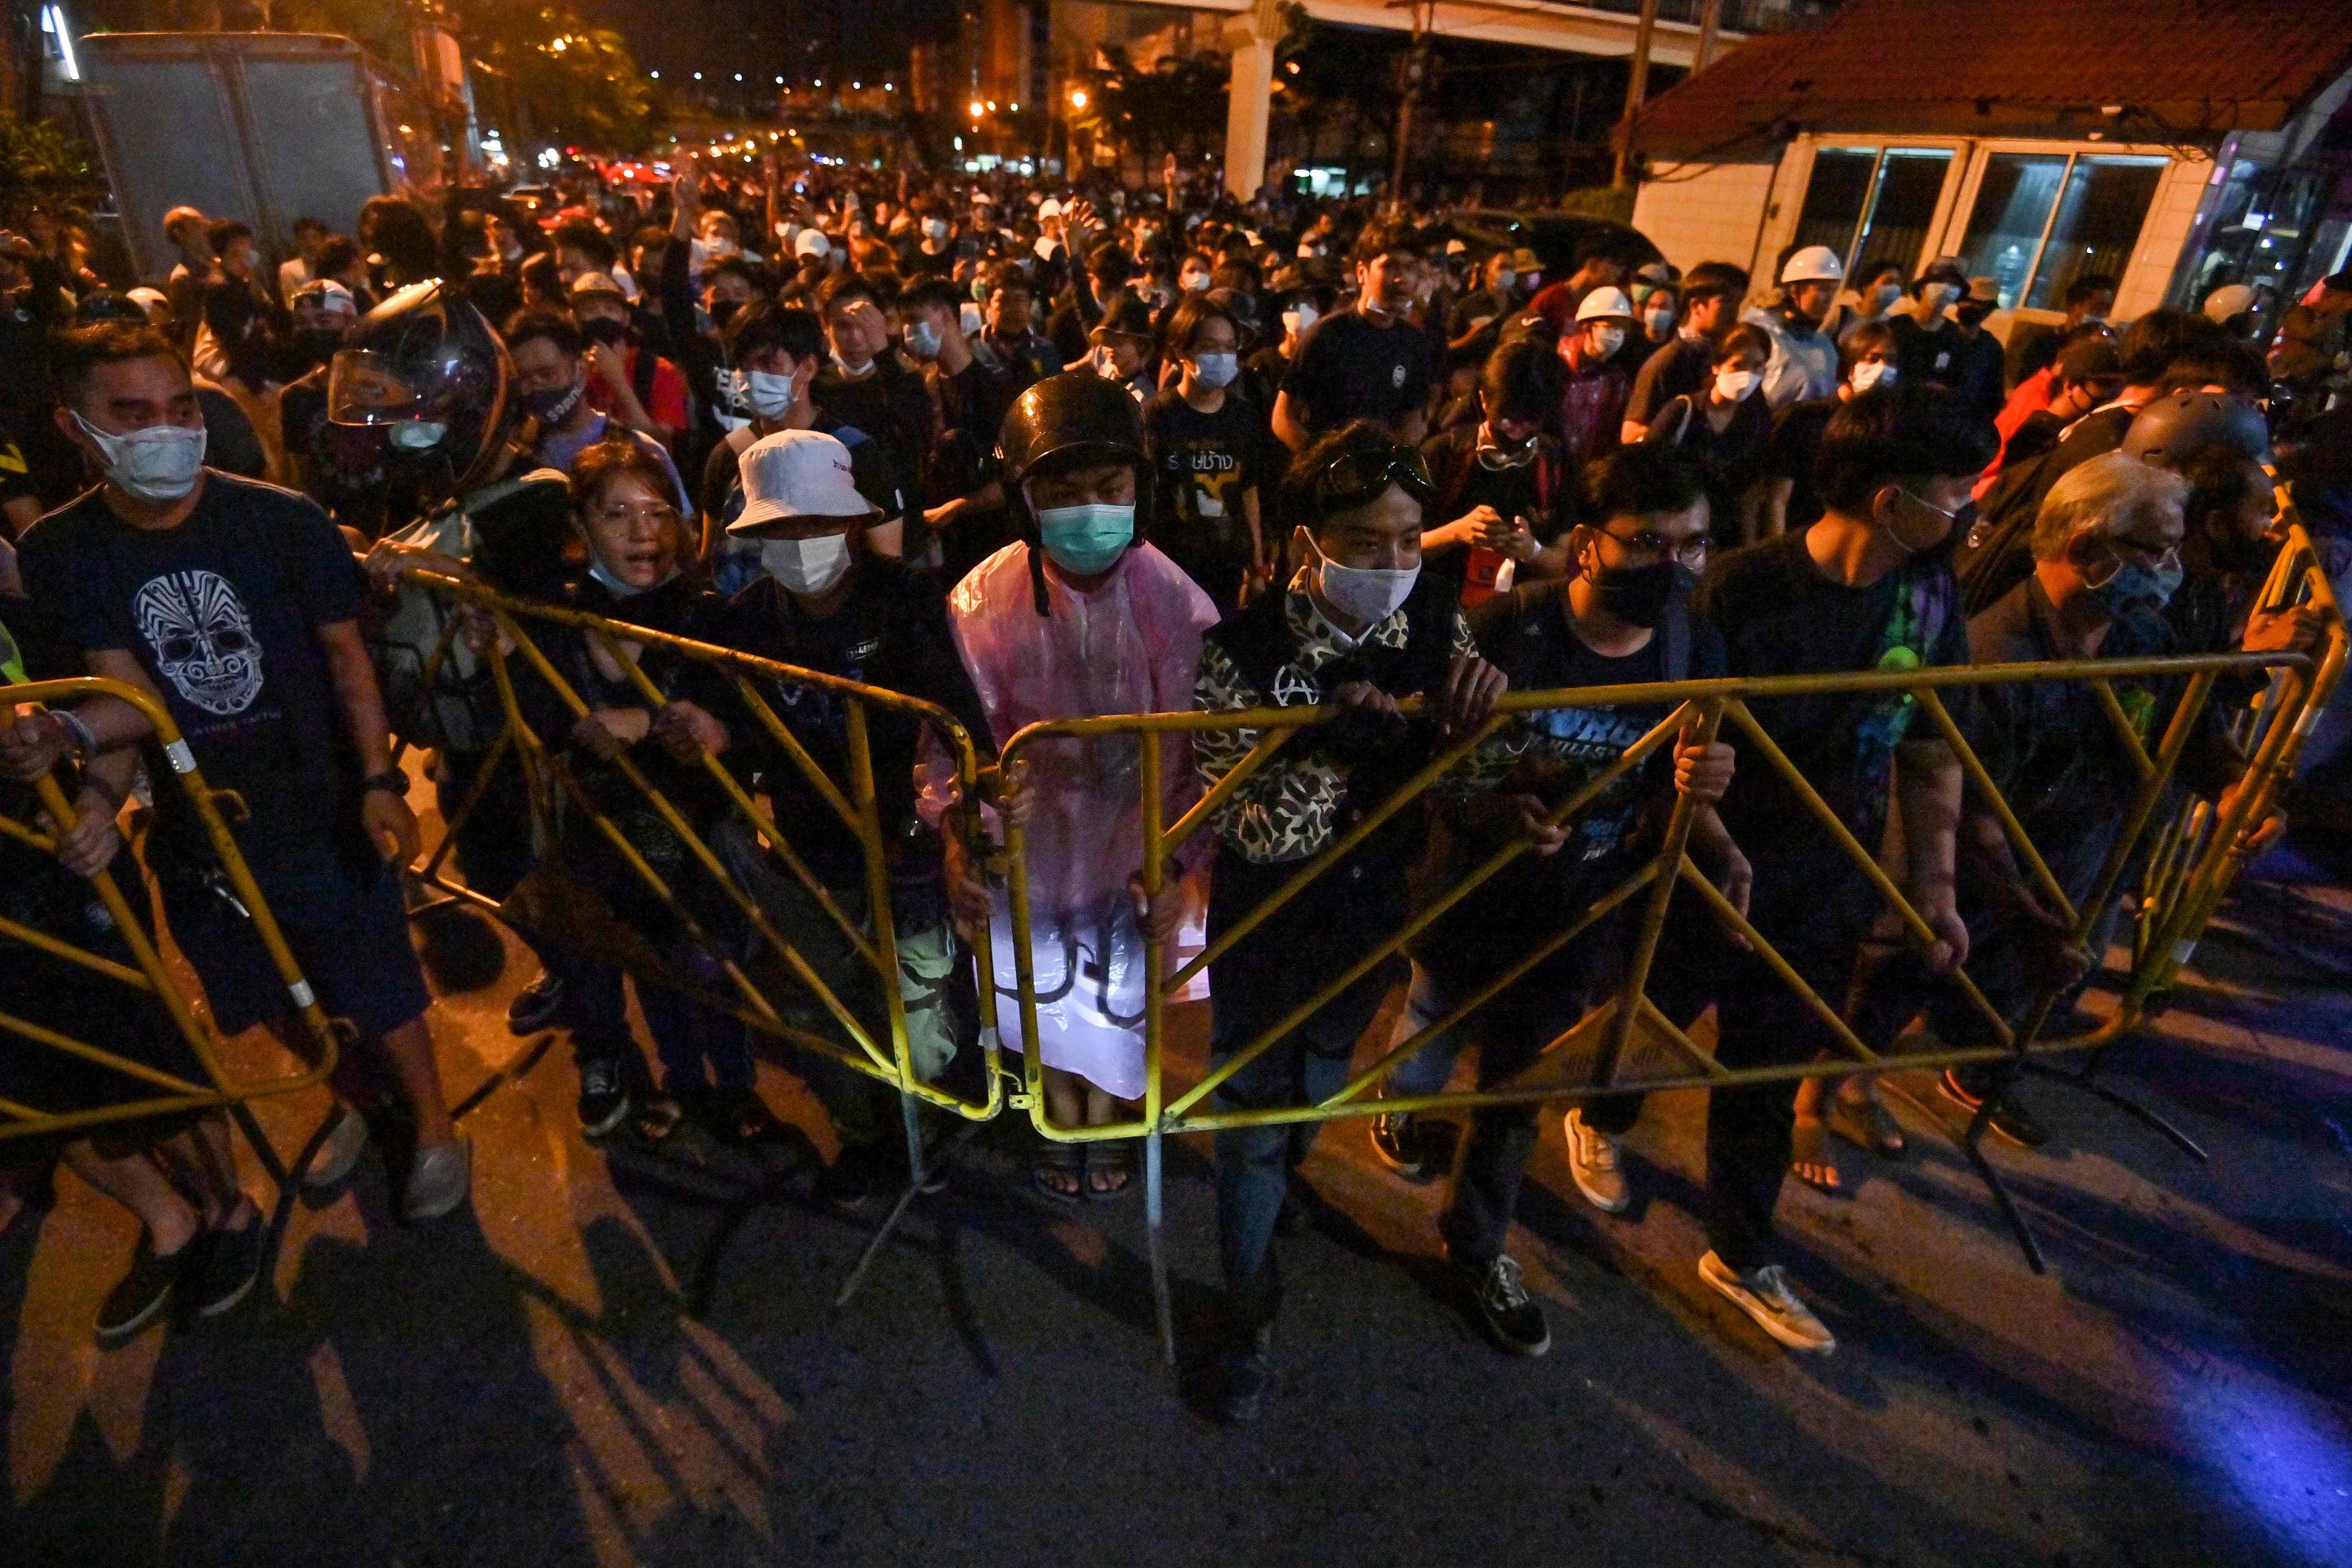 Pro-democracy protesters walk while holding barricades during an anti-government rally at Wongwian Yai in Bangkok. Credits: AFP Photo